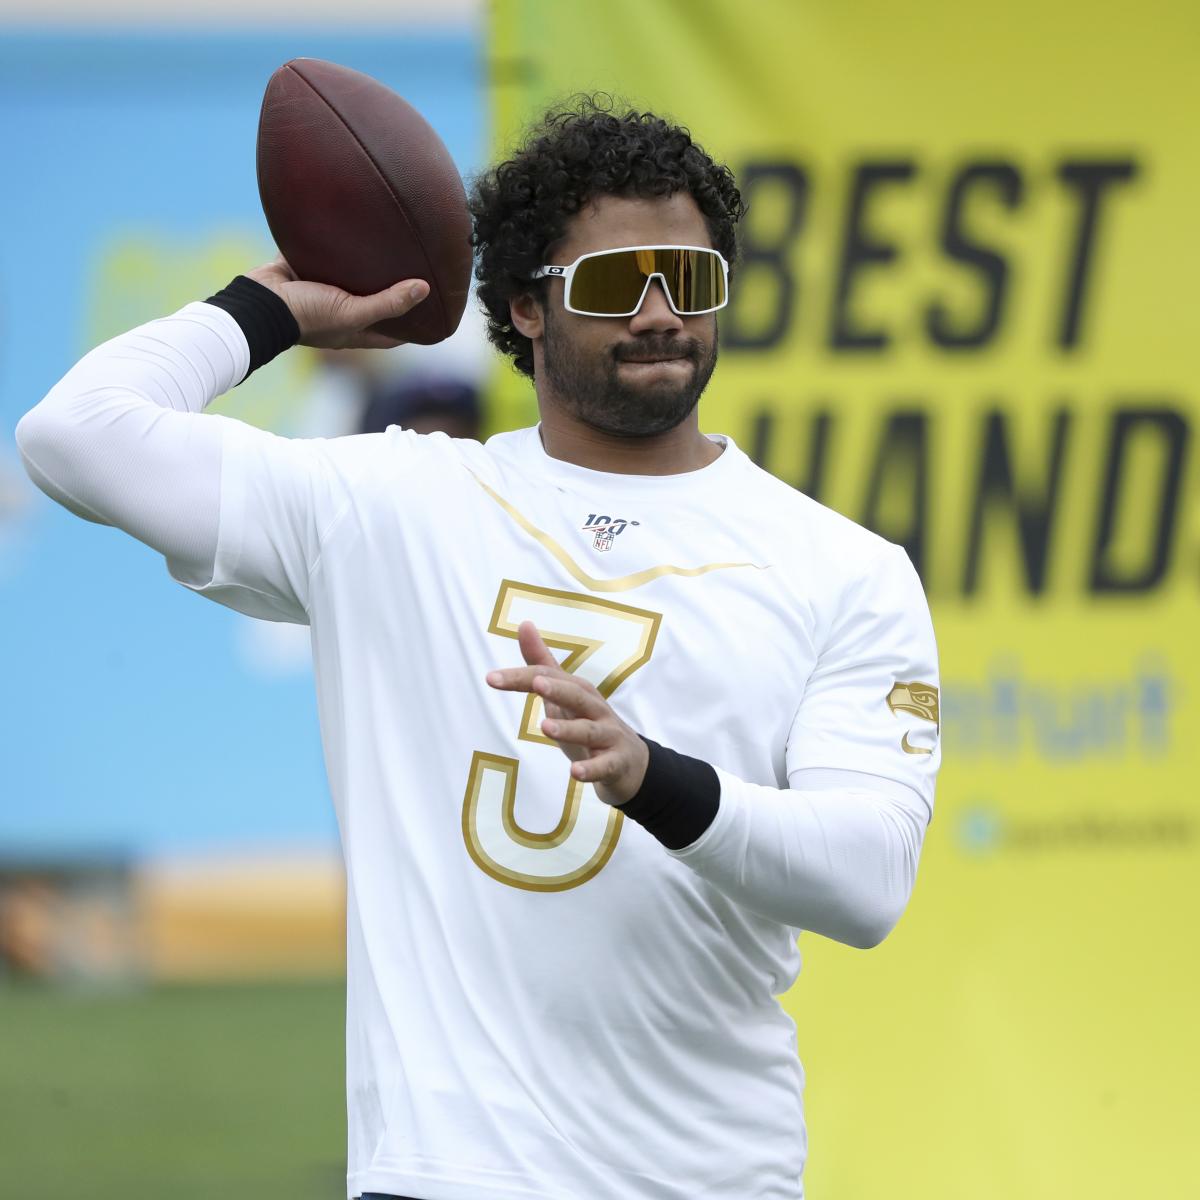 Pro Bowl 2020 Rosters, Jerseys, Odds and Predictions for NFL All-Star Game | Bleacher ...